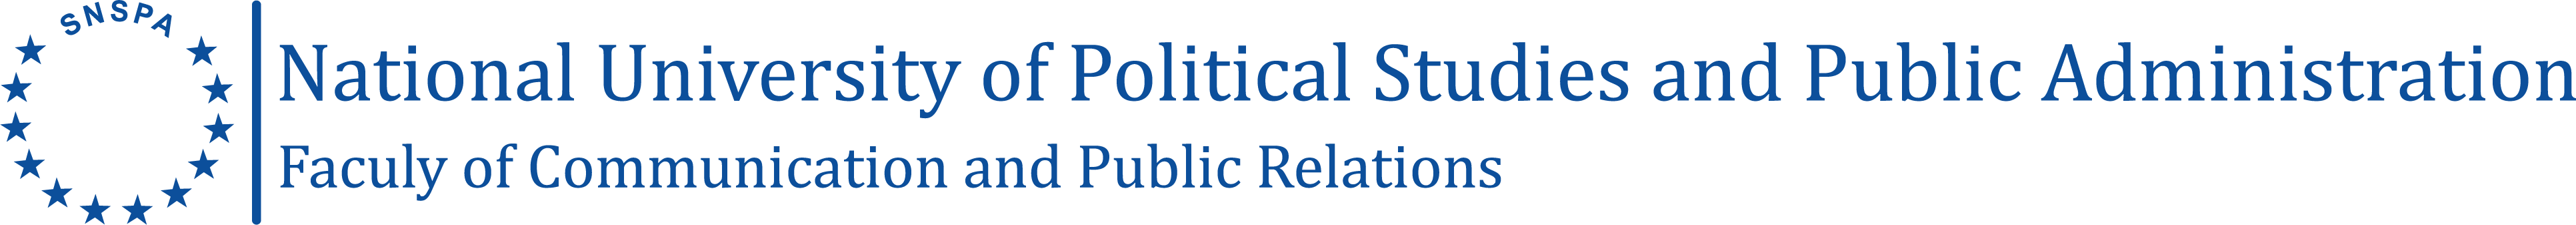 logo of National University of Political Studies and Public Administration